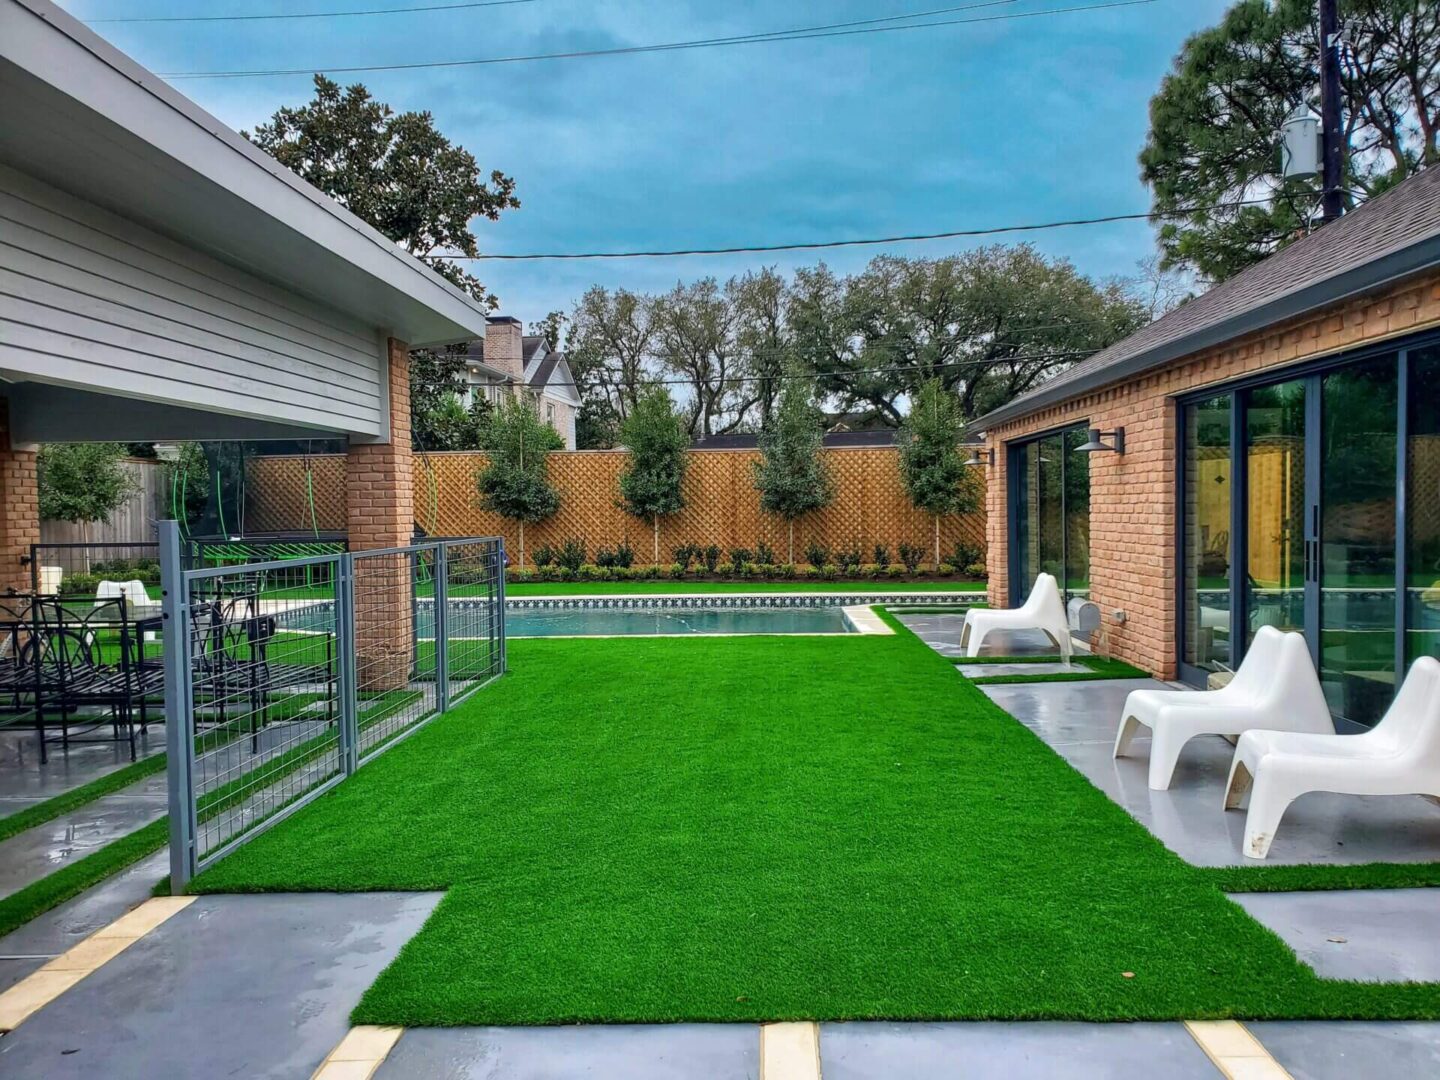 A property with artificial grass